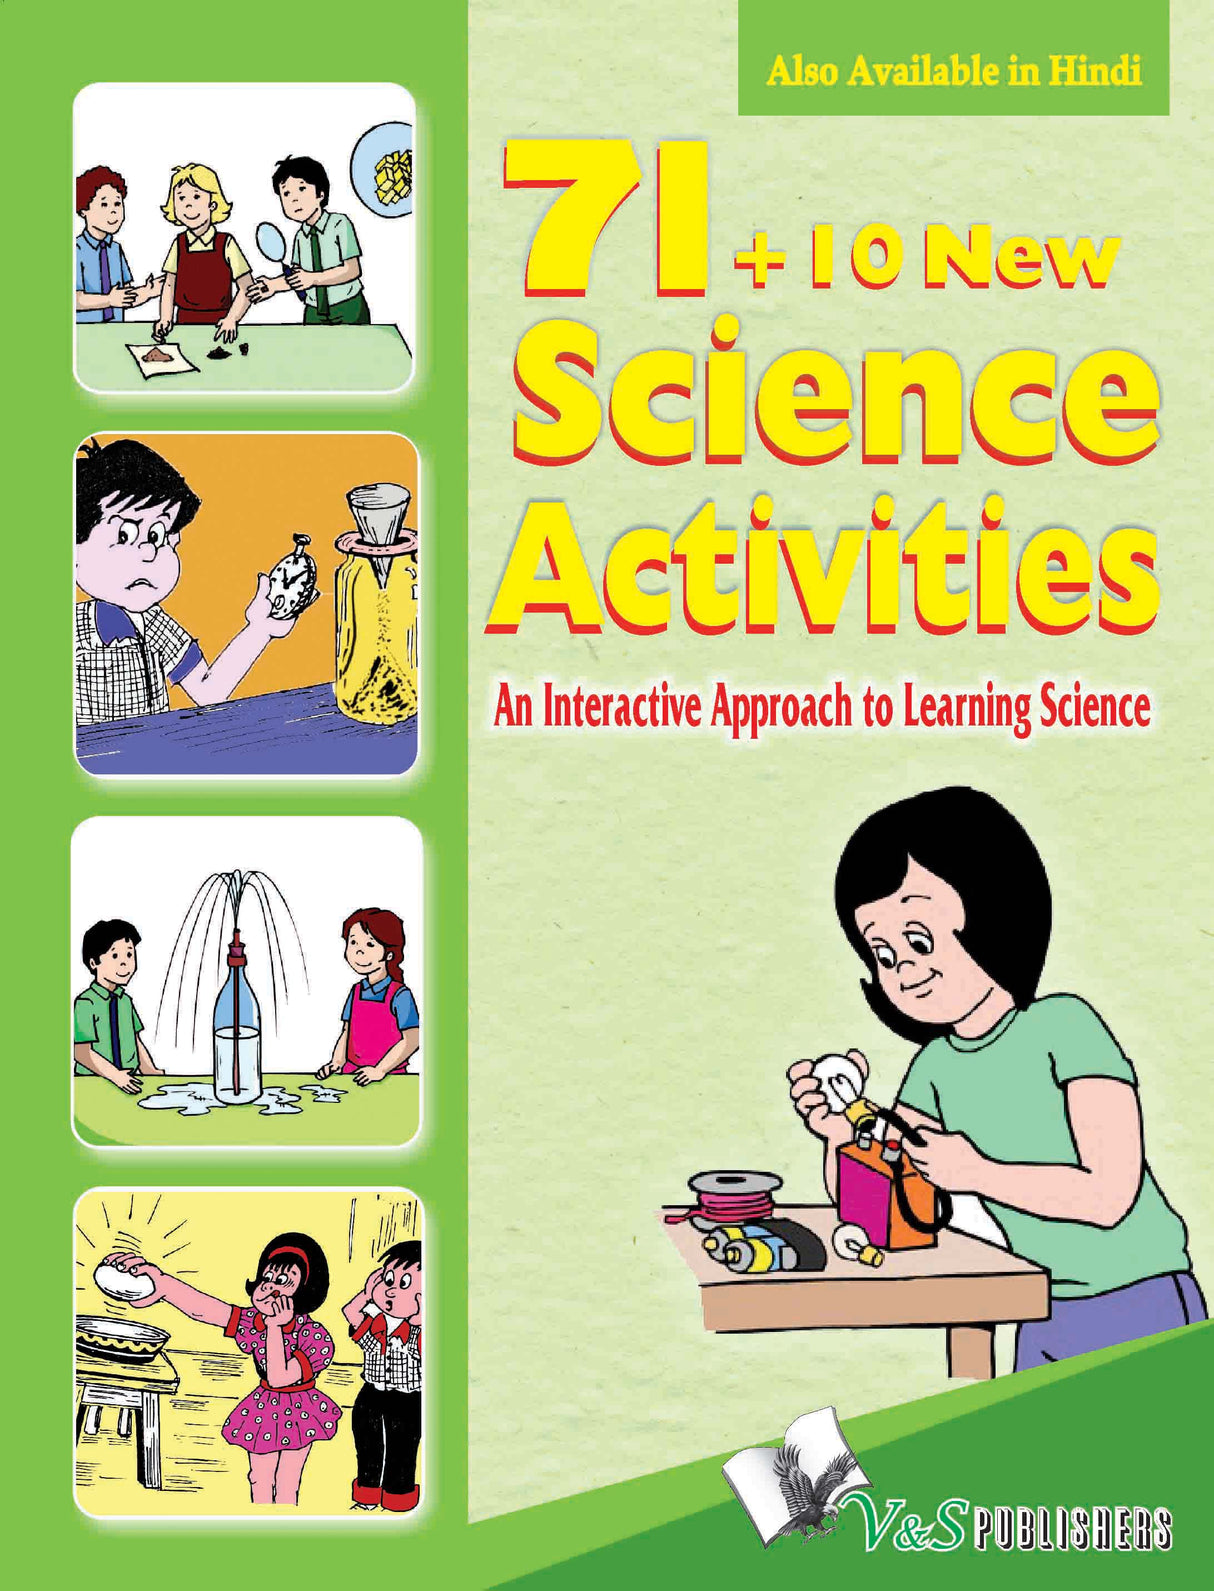 71+10 New Science Activities : An interactive approach to learning science